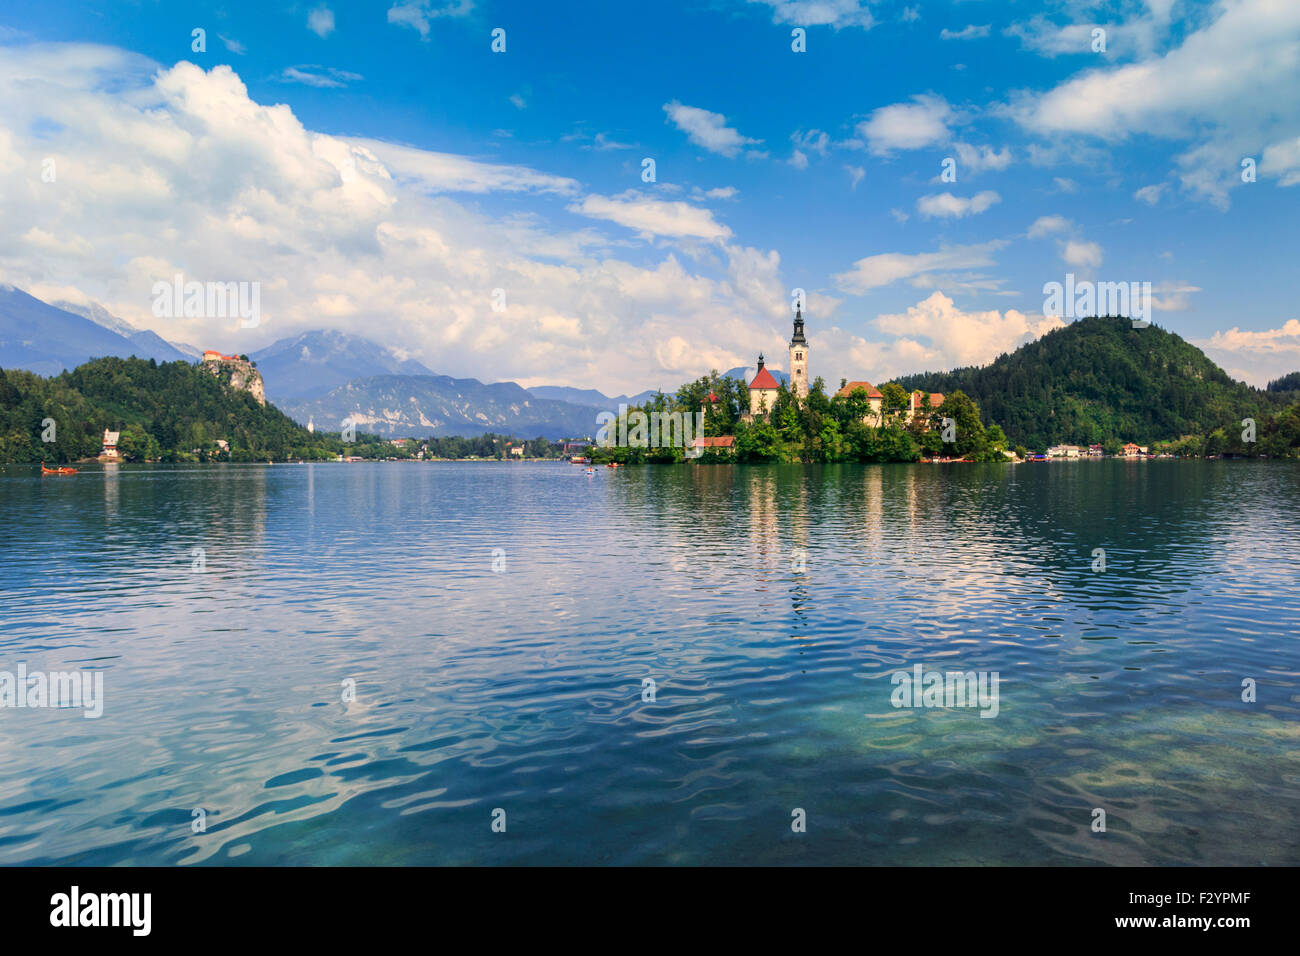 Bled with lake, island, castle and mountains in background, Slovenia, Europe Stock Photo